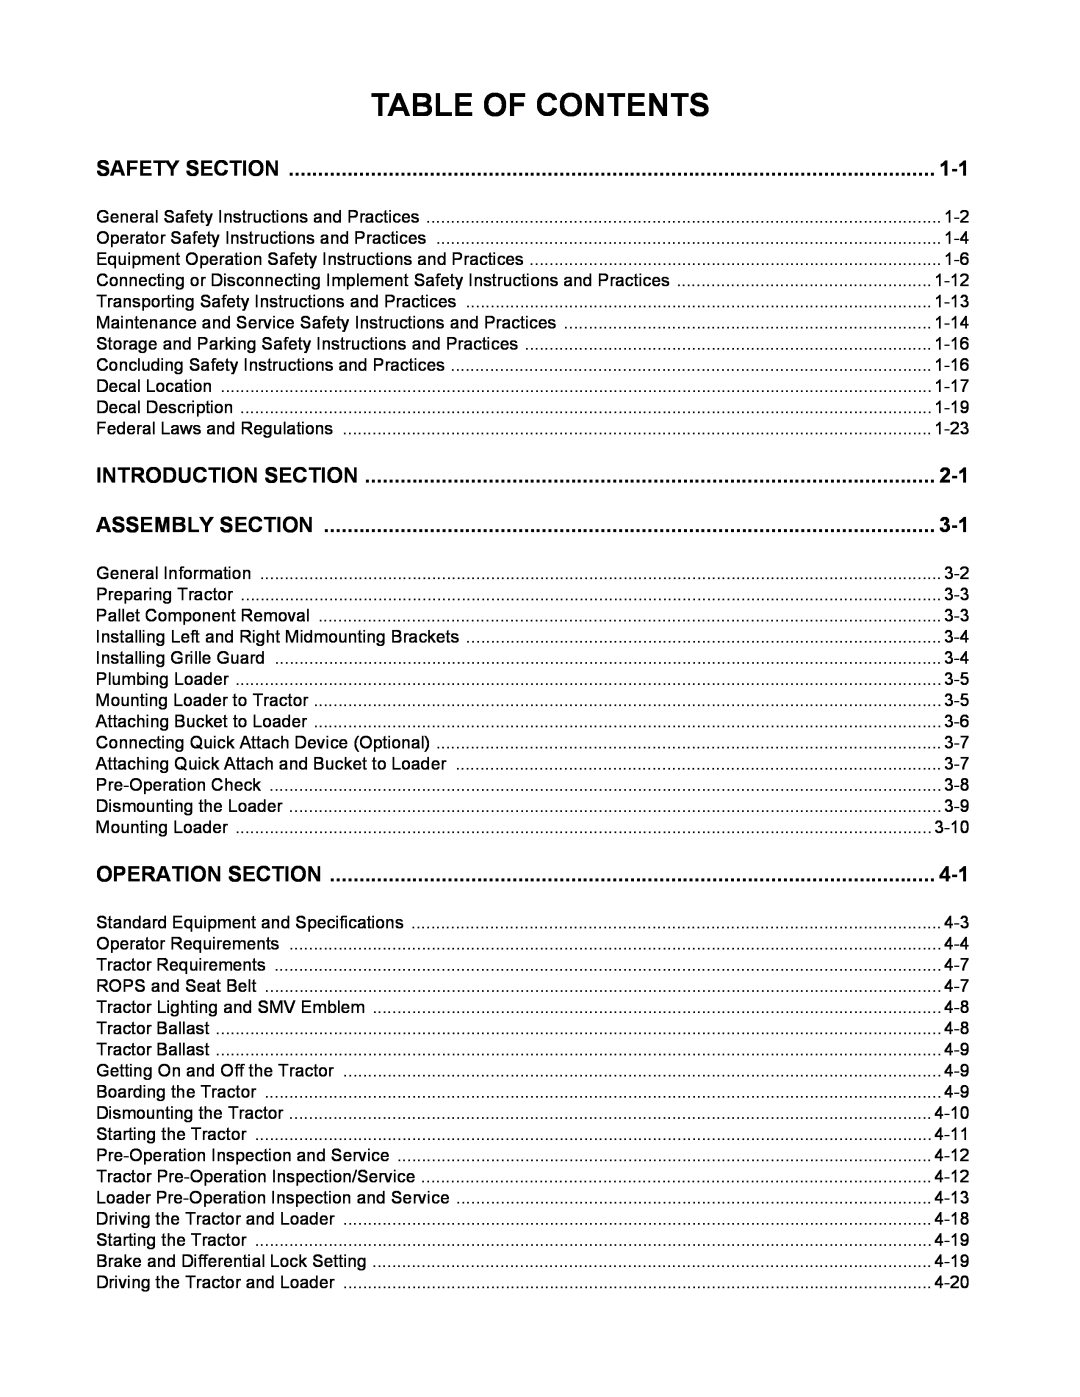 Rhino Mounts 1594 manual Table Of Contents, Safety Section, Introduction Section, Assembly Section, Operation Section 